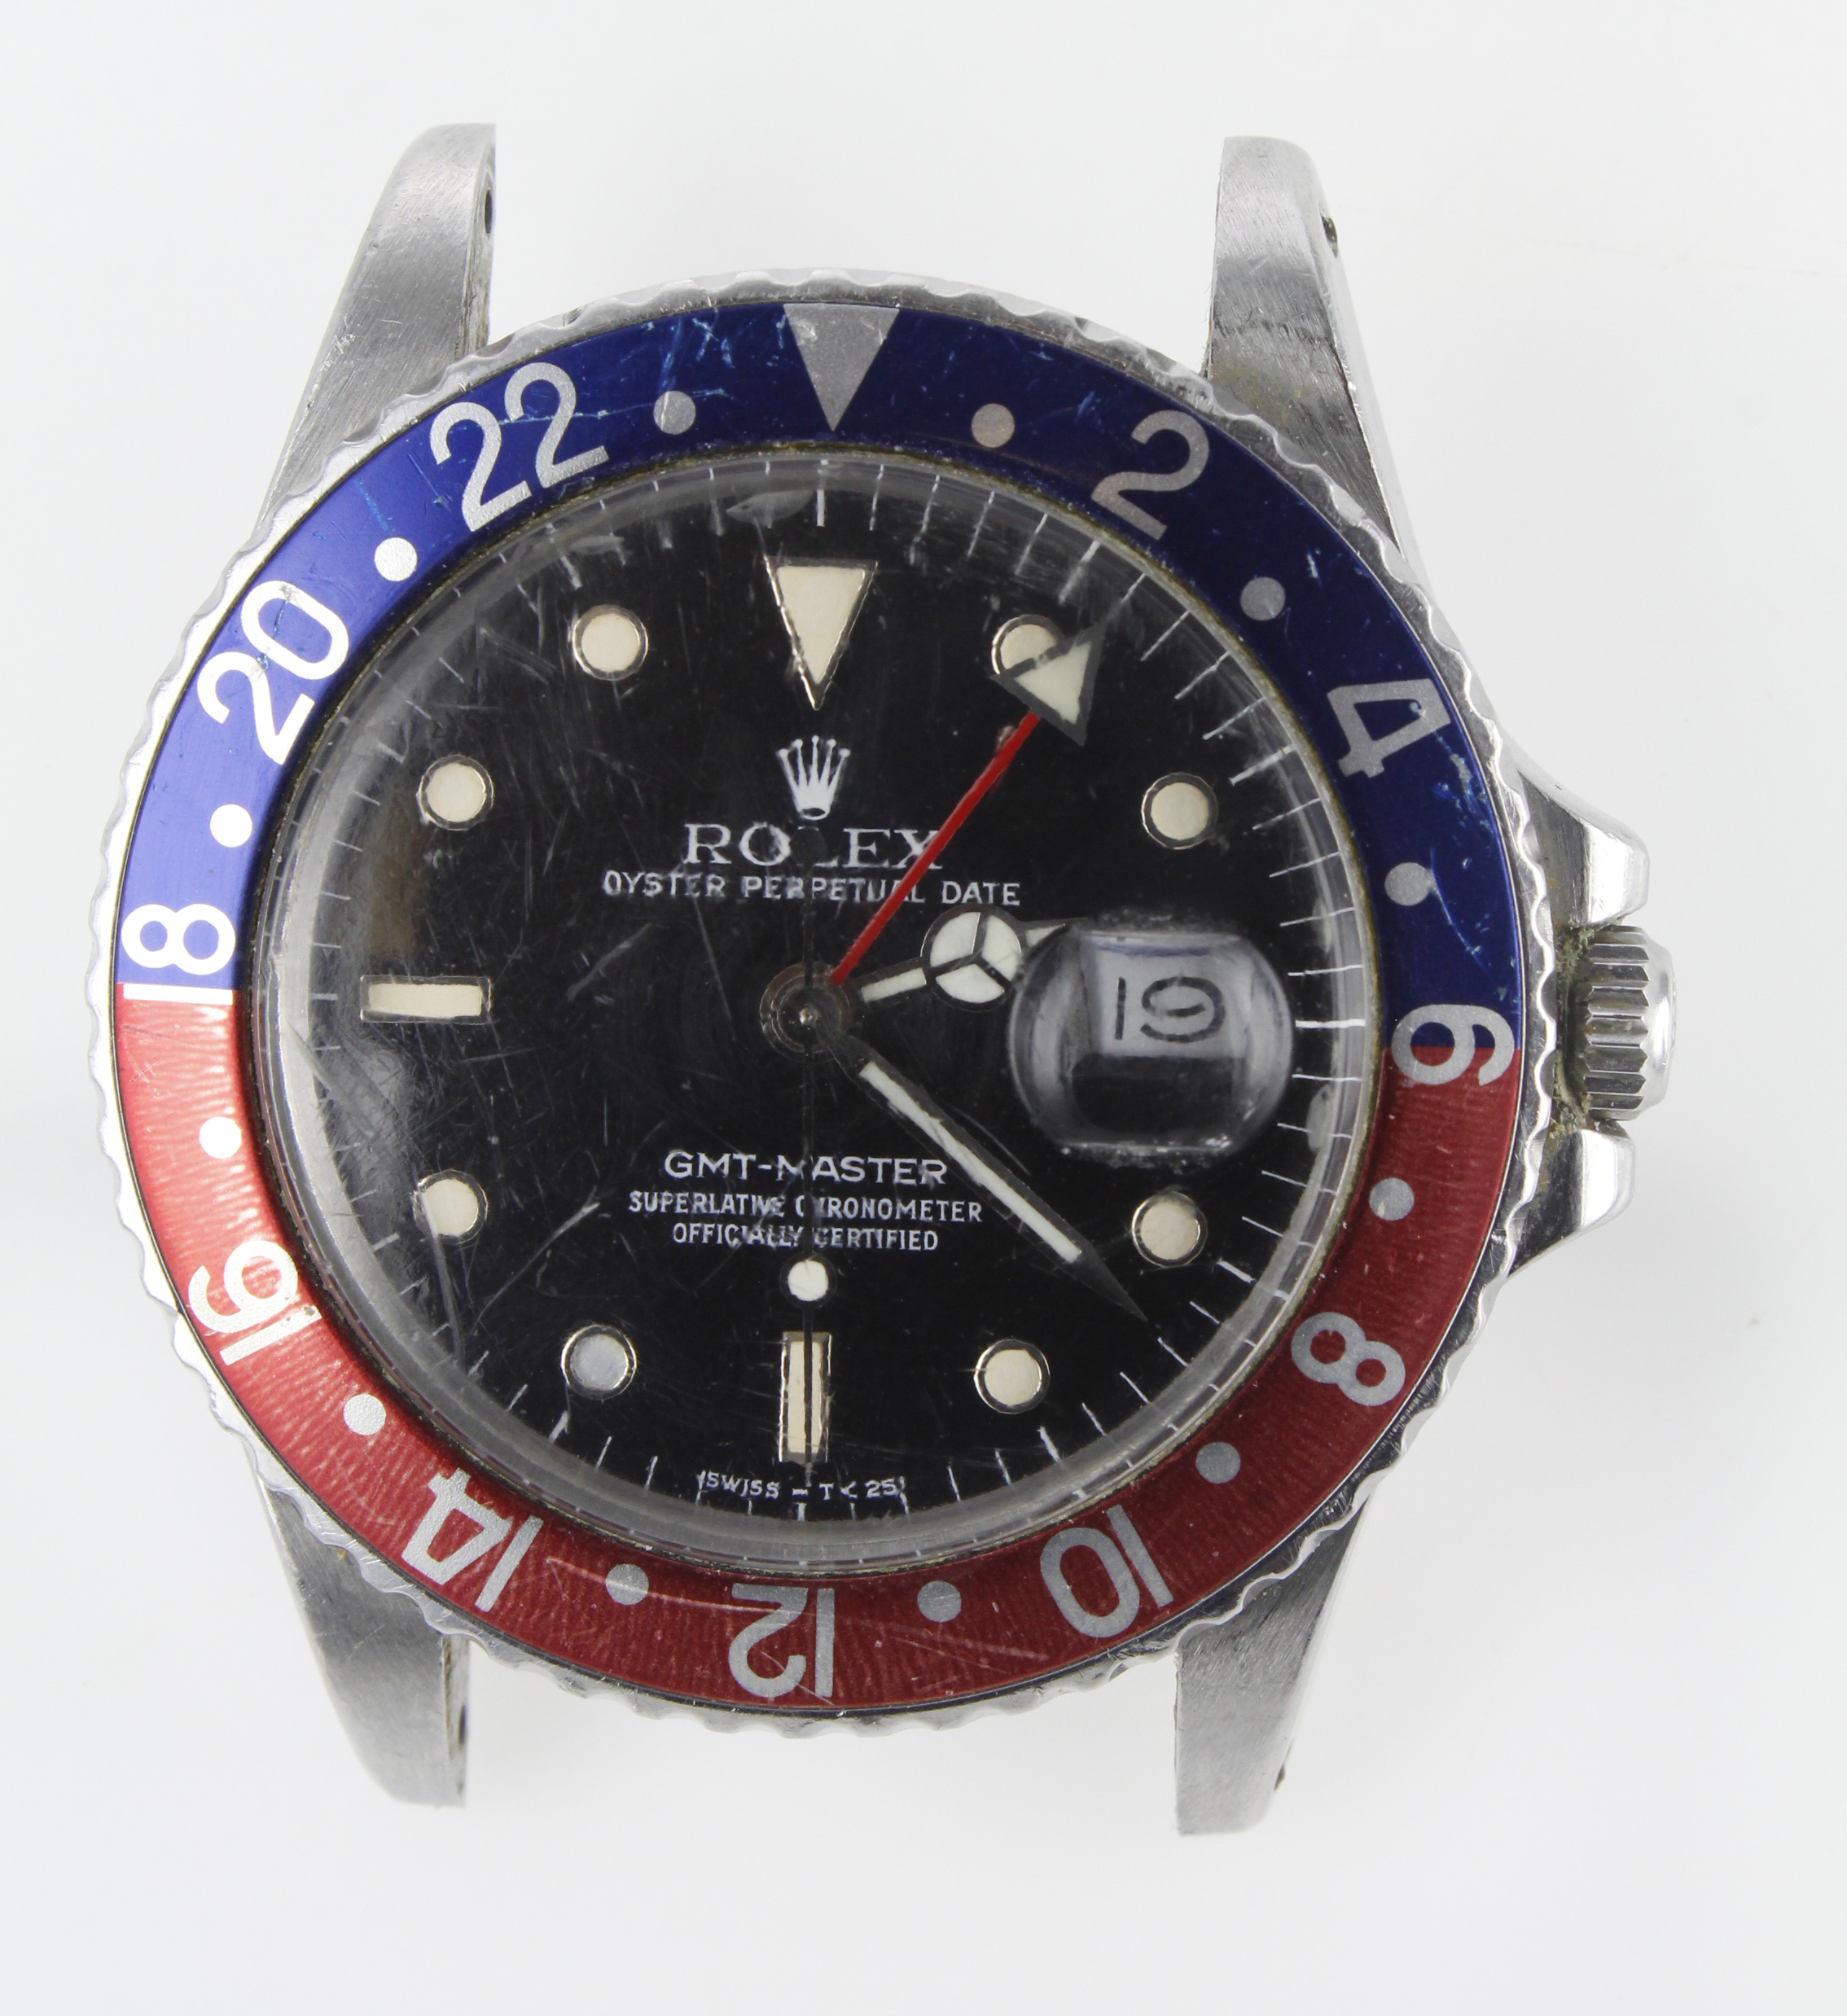 Rolex Oyster Perpetual date GMT-Master 'Pepsi' stainless steel cased gents wristwatch, ref. 16750, - Image 3 of 5